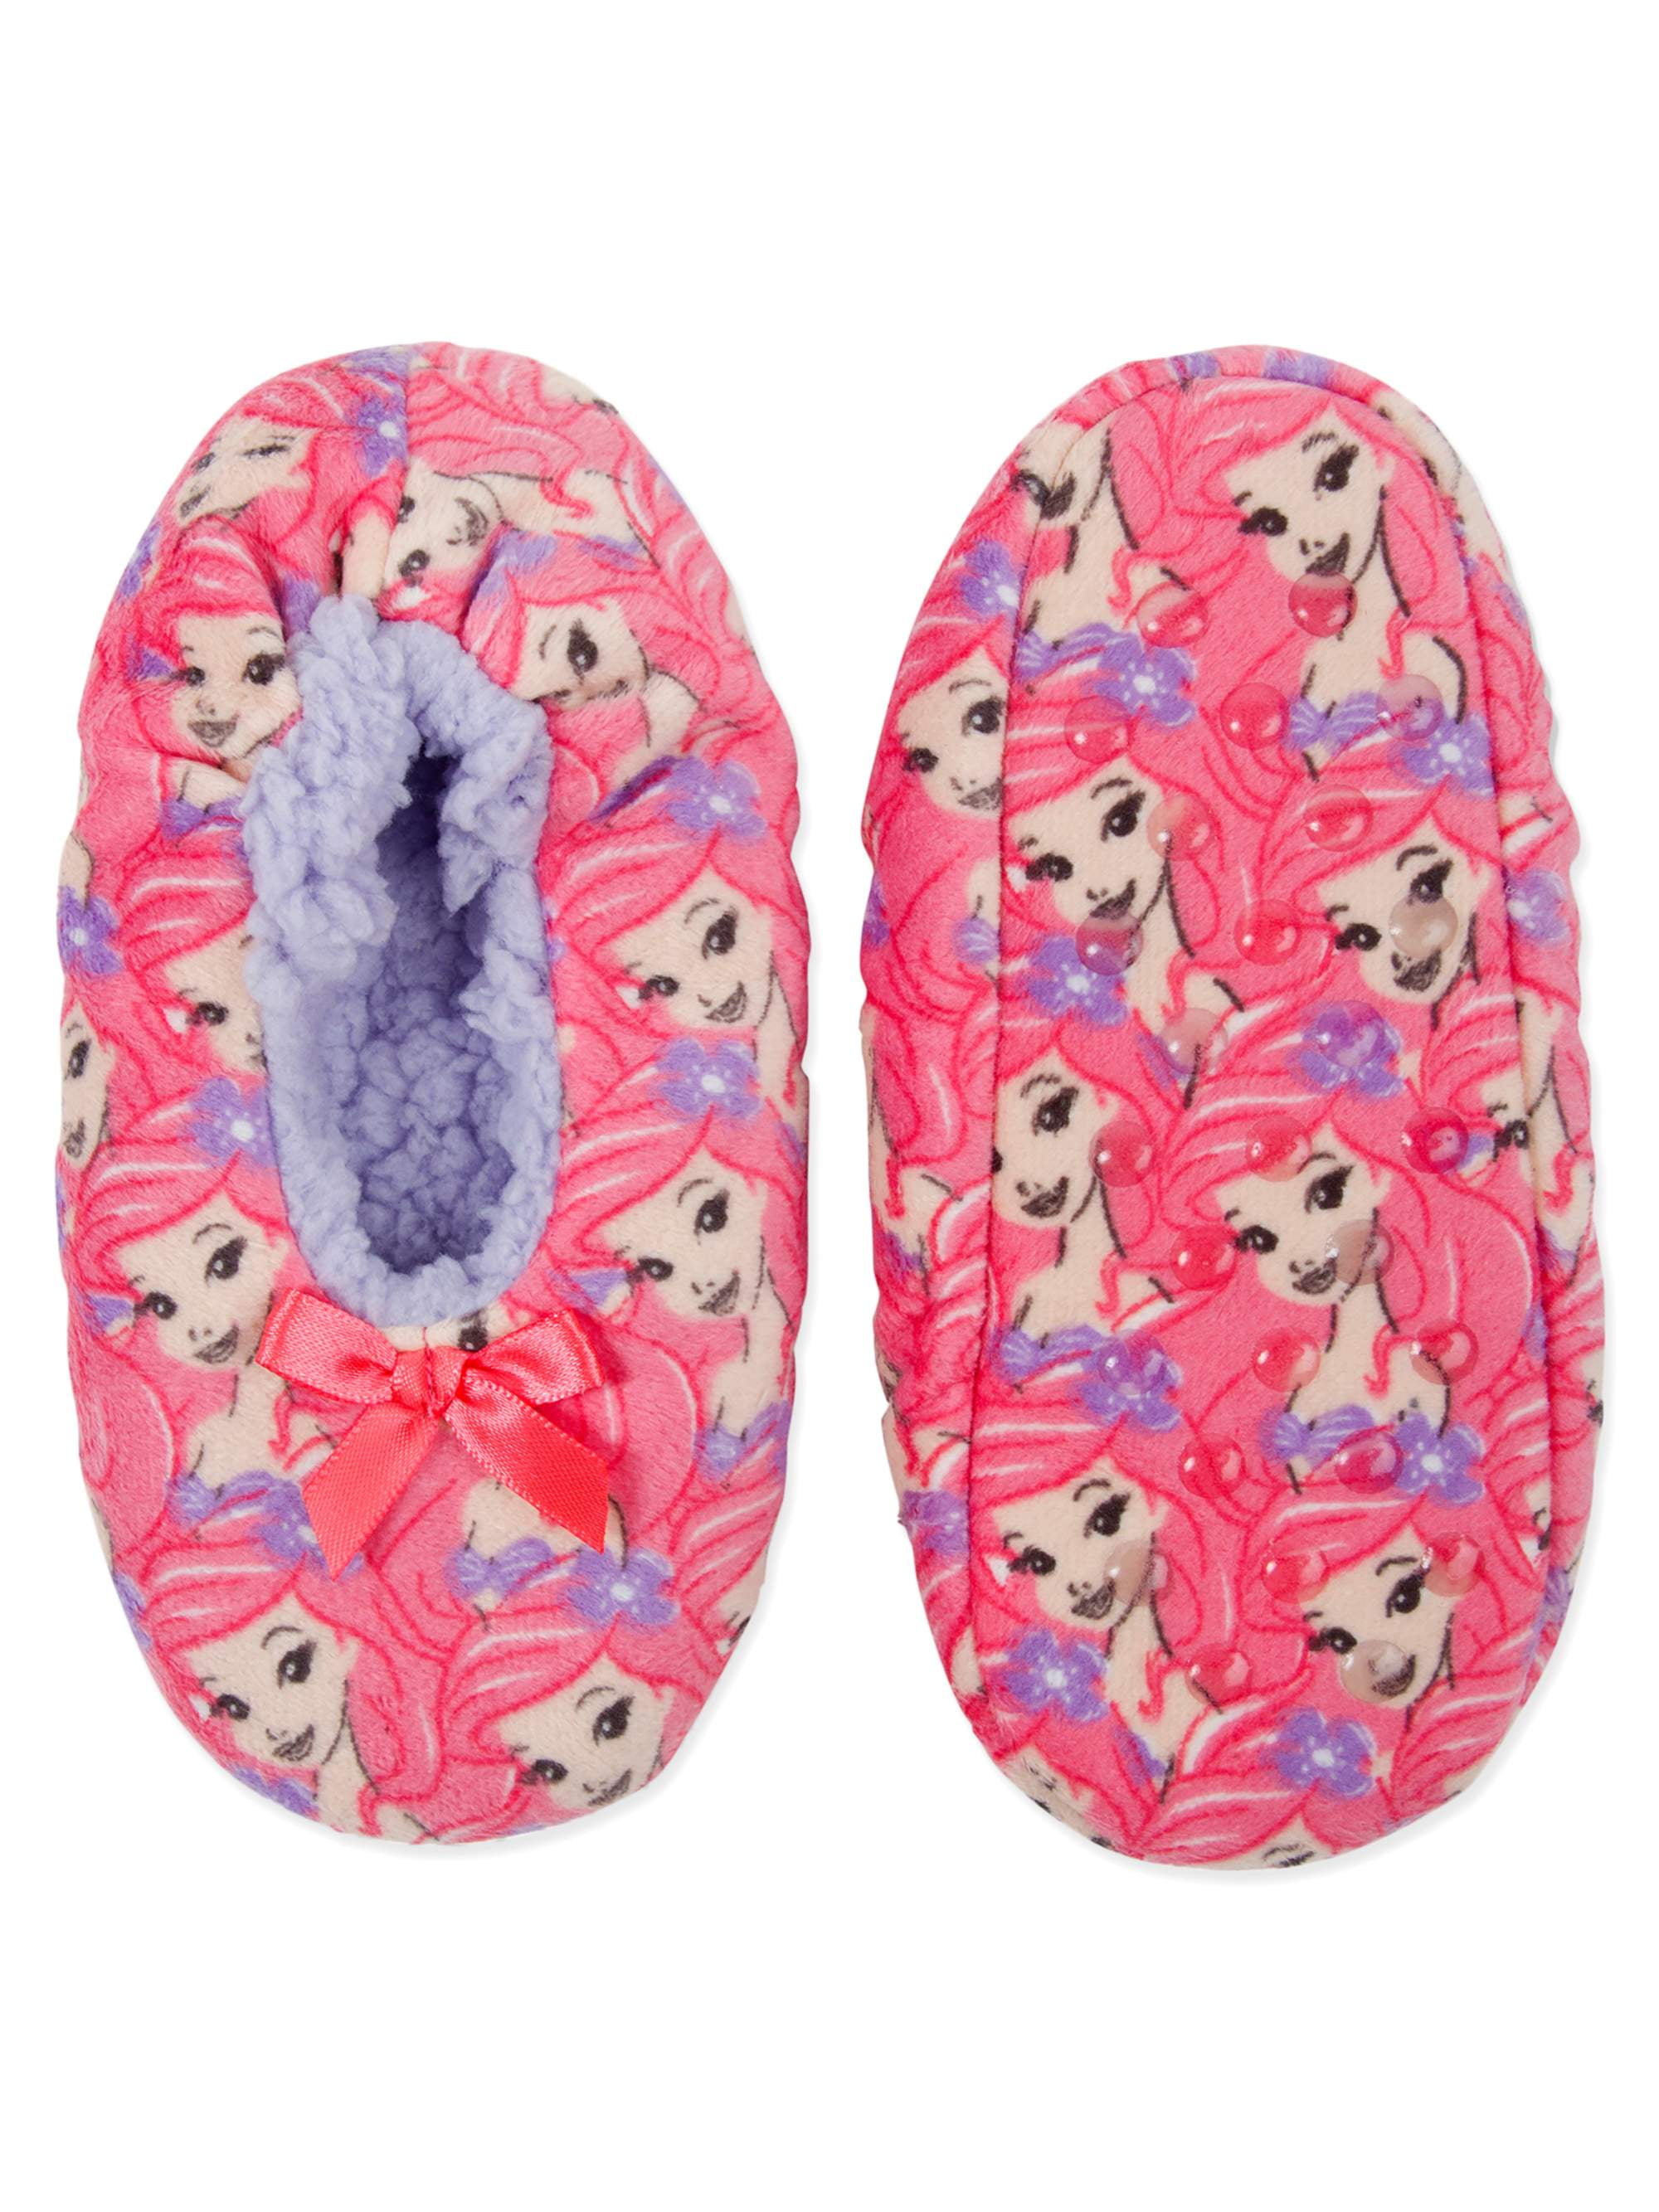 m and s girls slippers